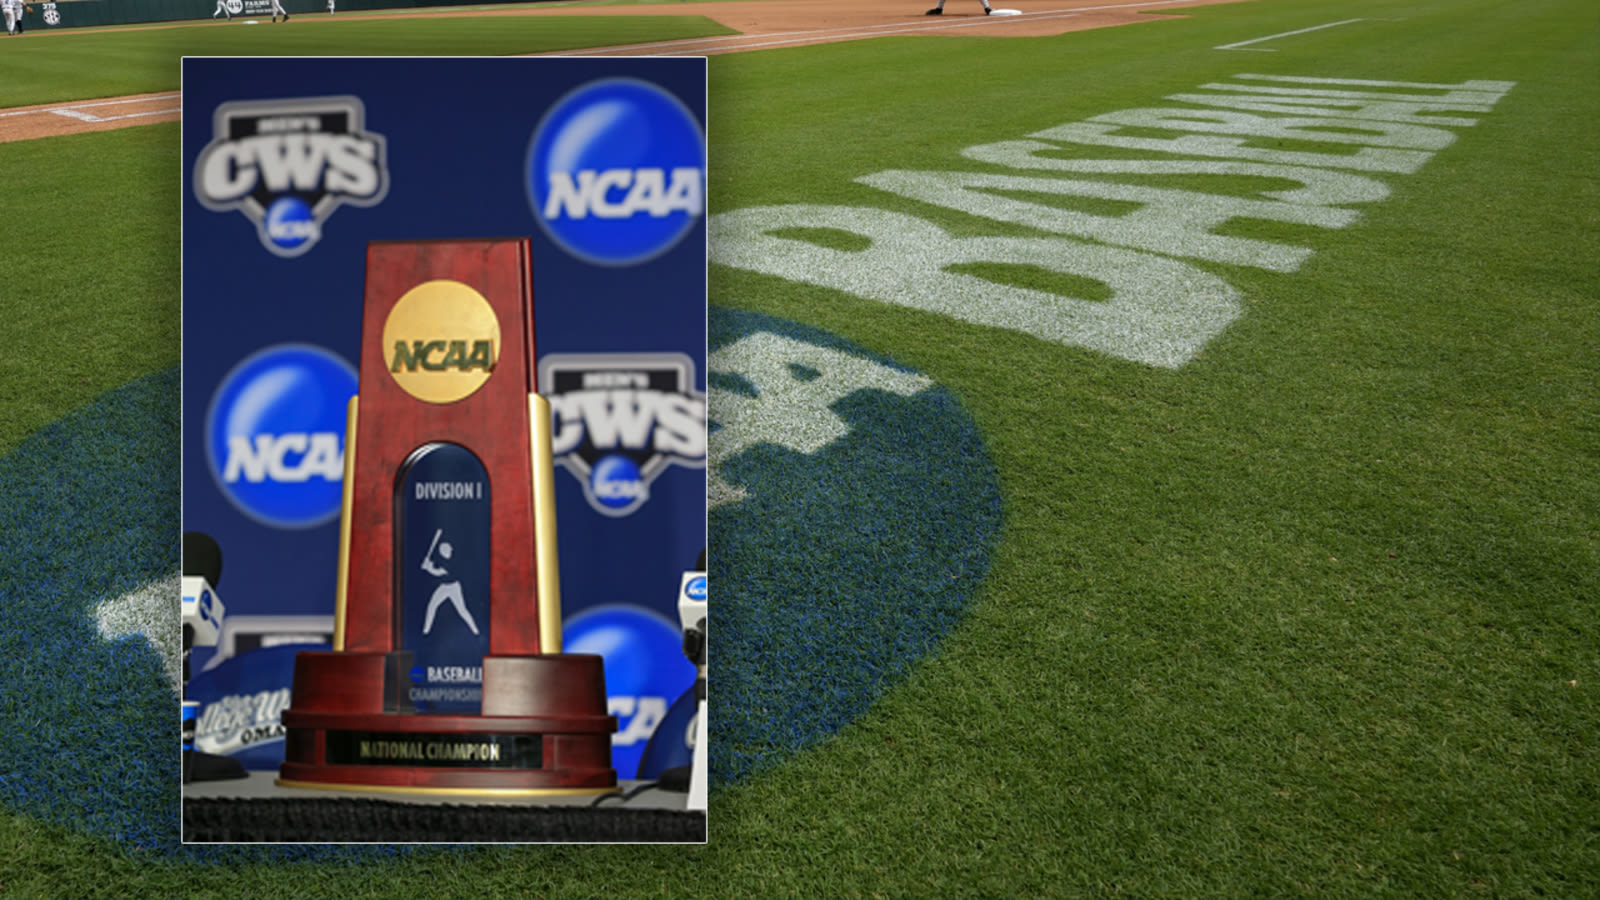 North Carolina seen as mecca of college baseball with 7 schools making regionals, 3 host sites